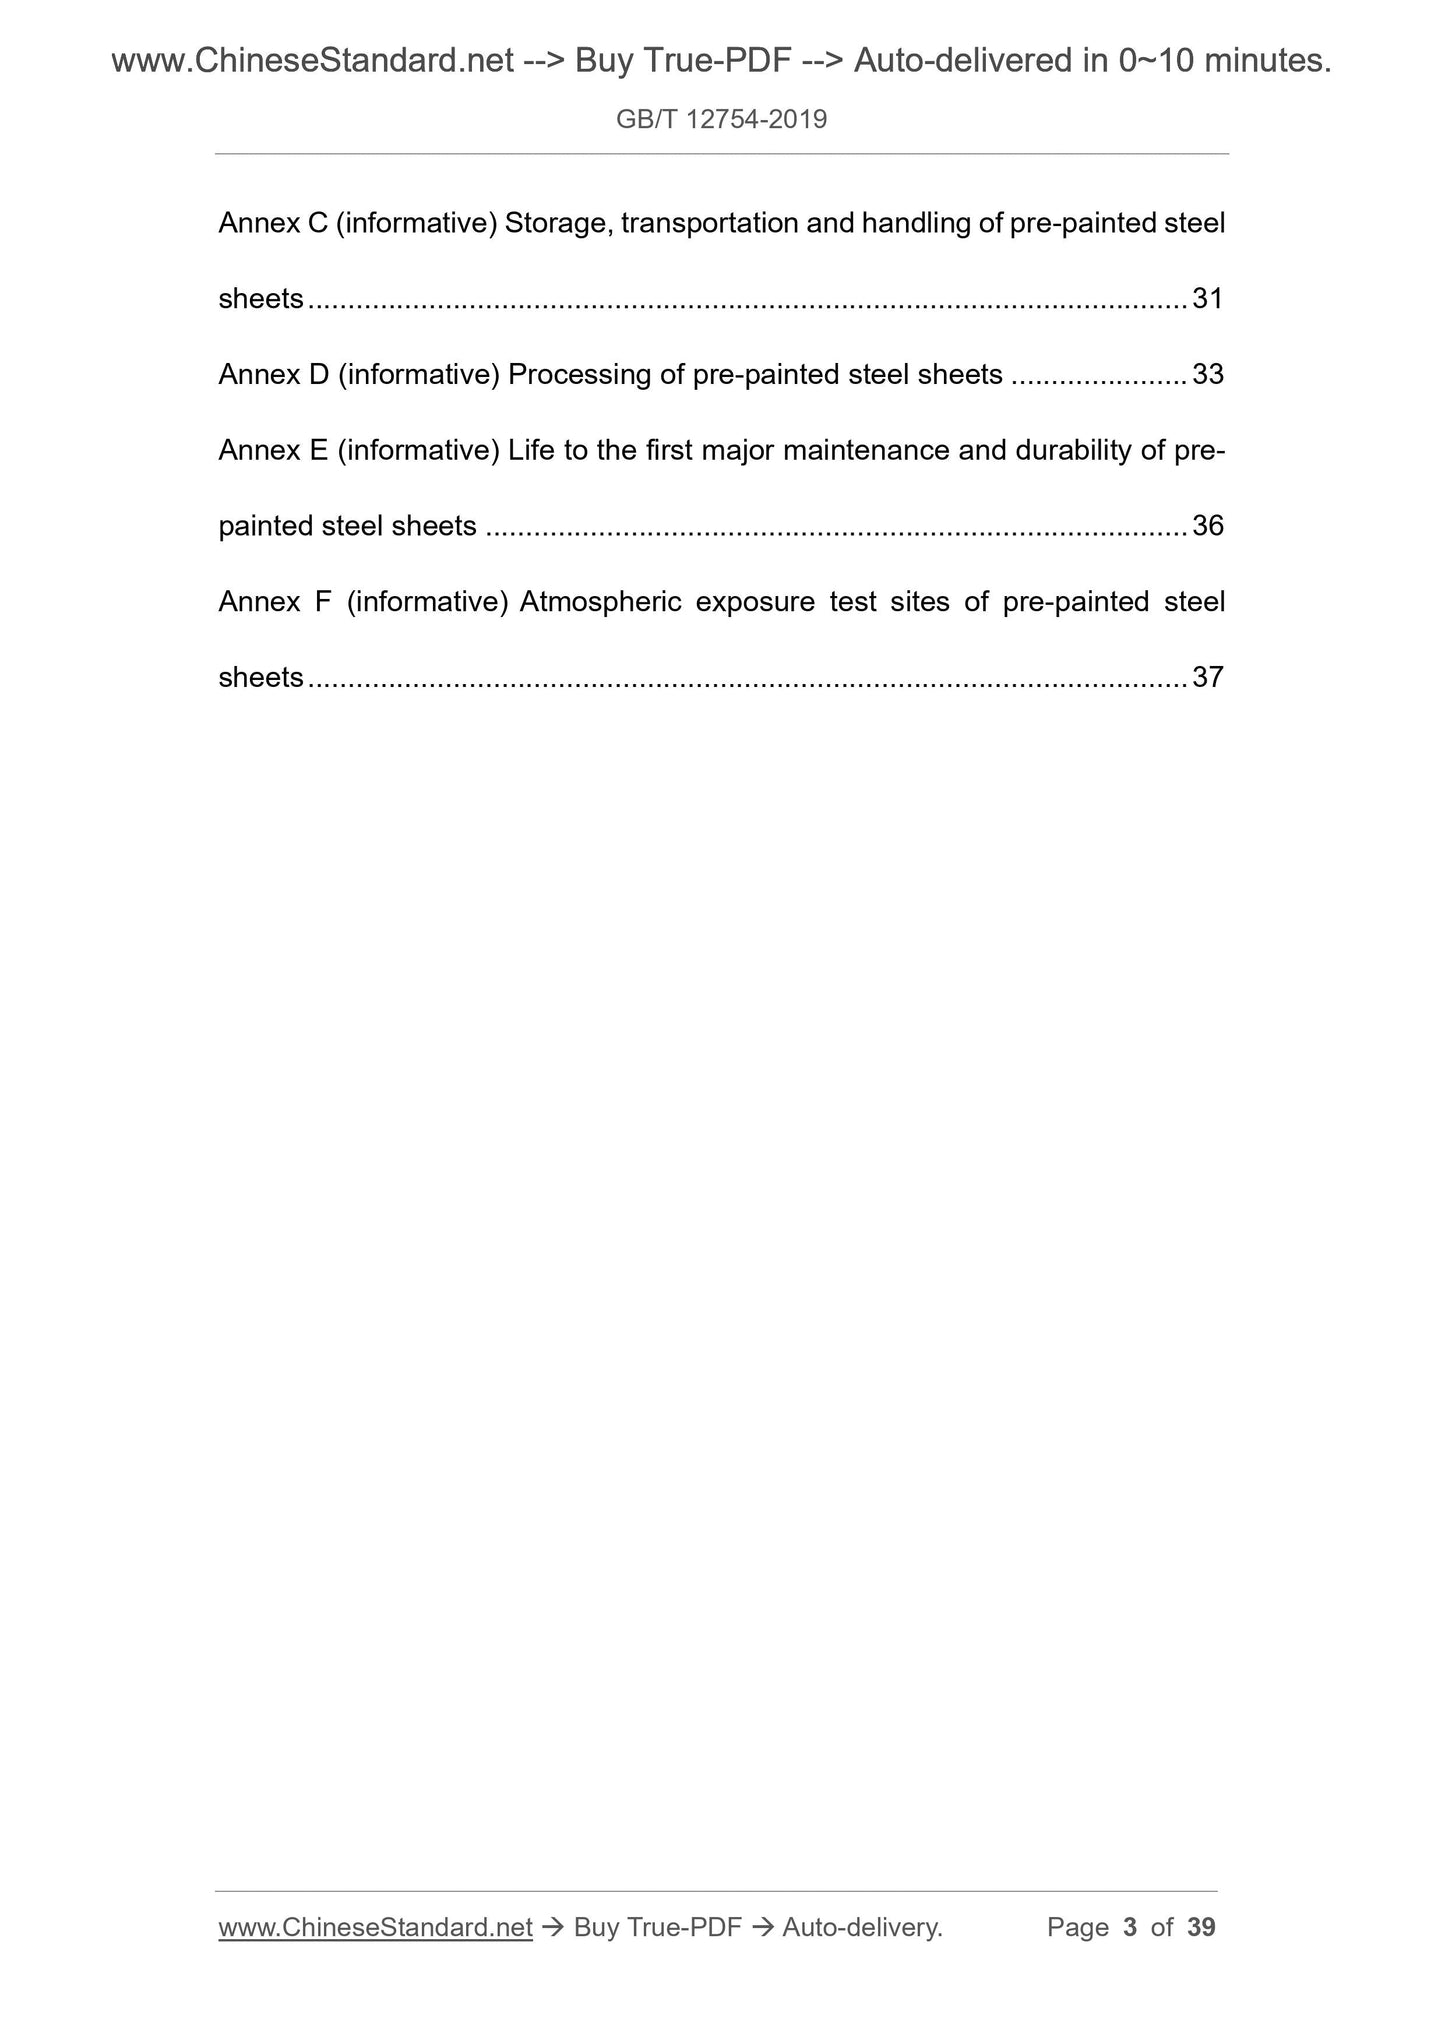 GB/T 12754-2019 Page 3